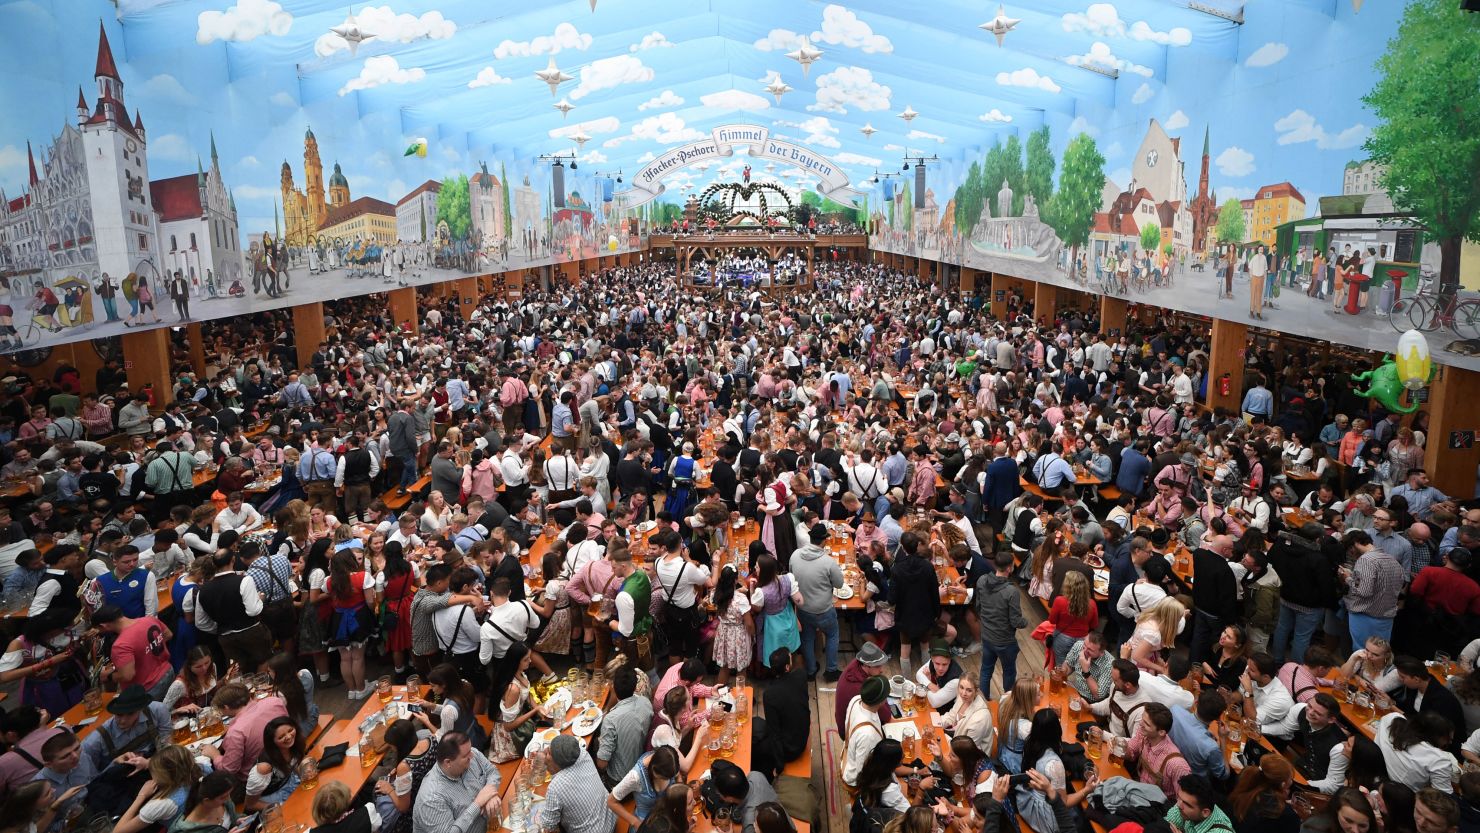 Visitors attend the official opening of the world's largest beer festival, the 187th Oktoberfest in Munich, Germany, September 17, 2022. REUTERS/Andreas Gebert